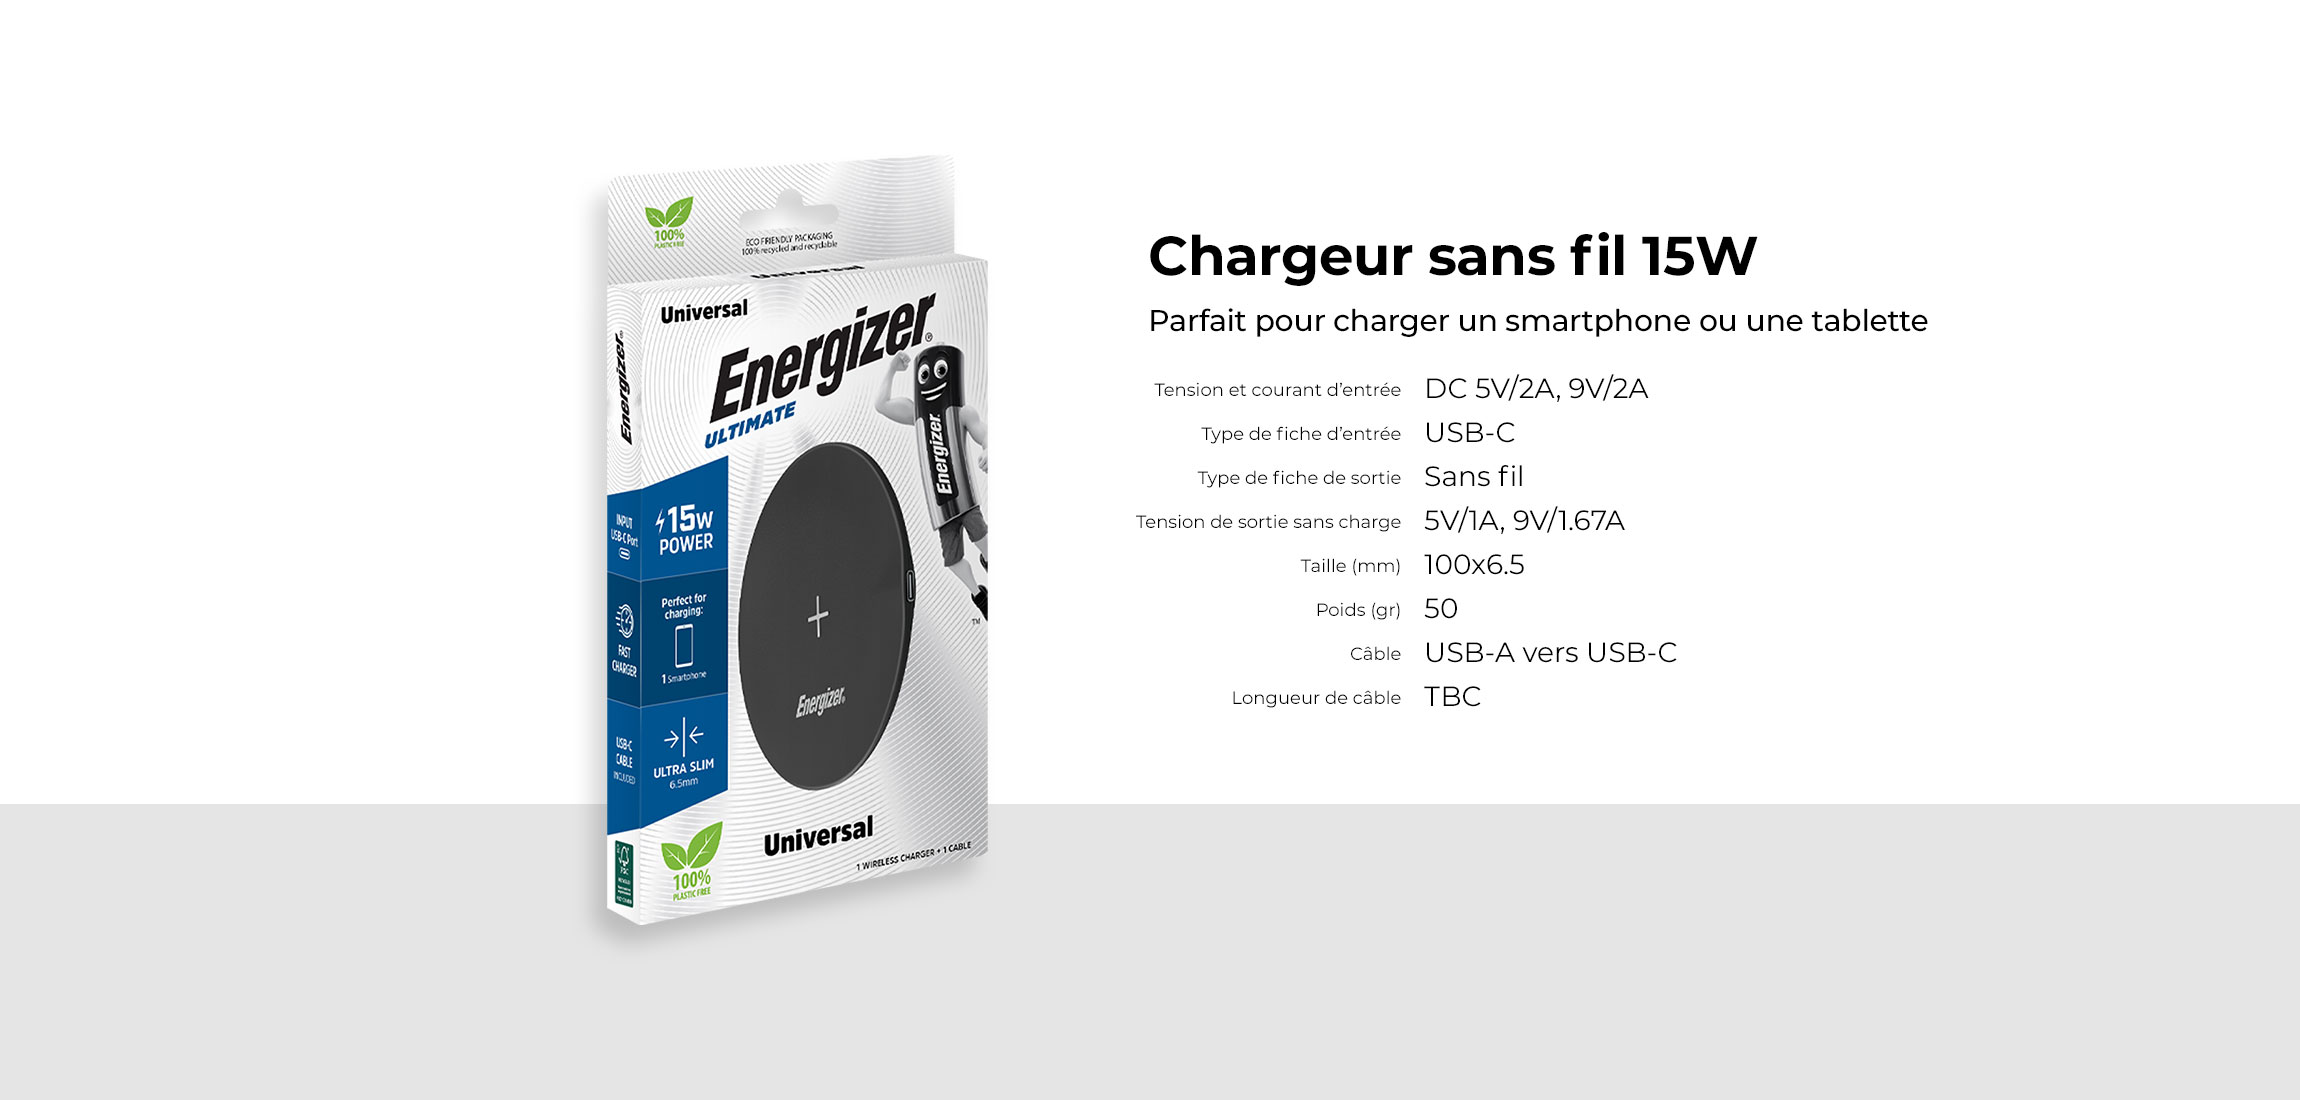 Wireless-charger-A15W-pack-fr.jpg